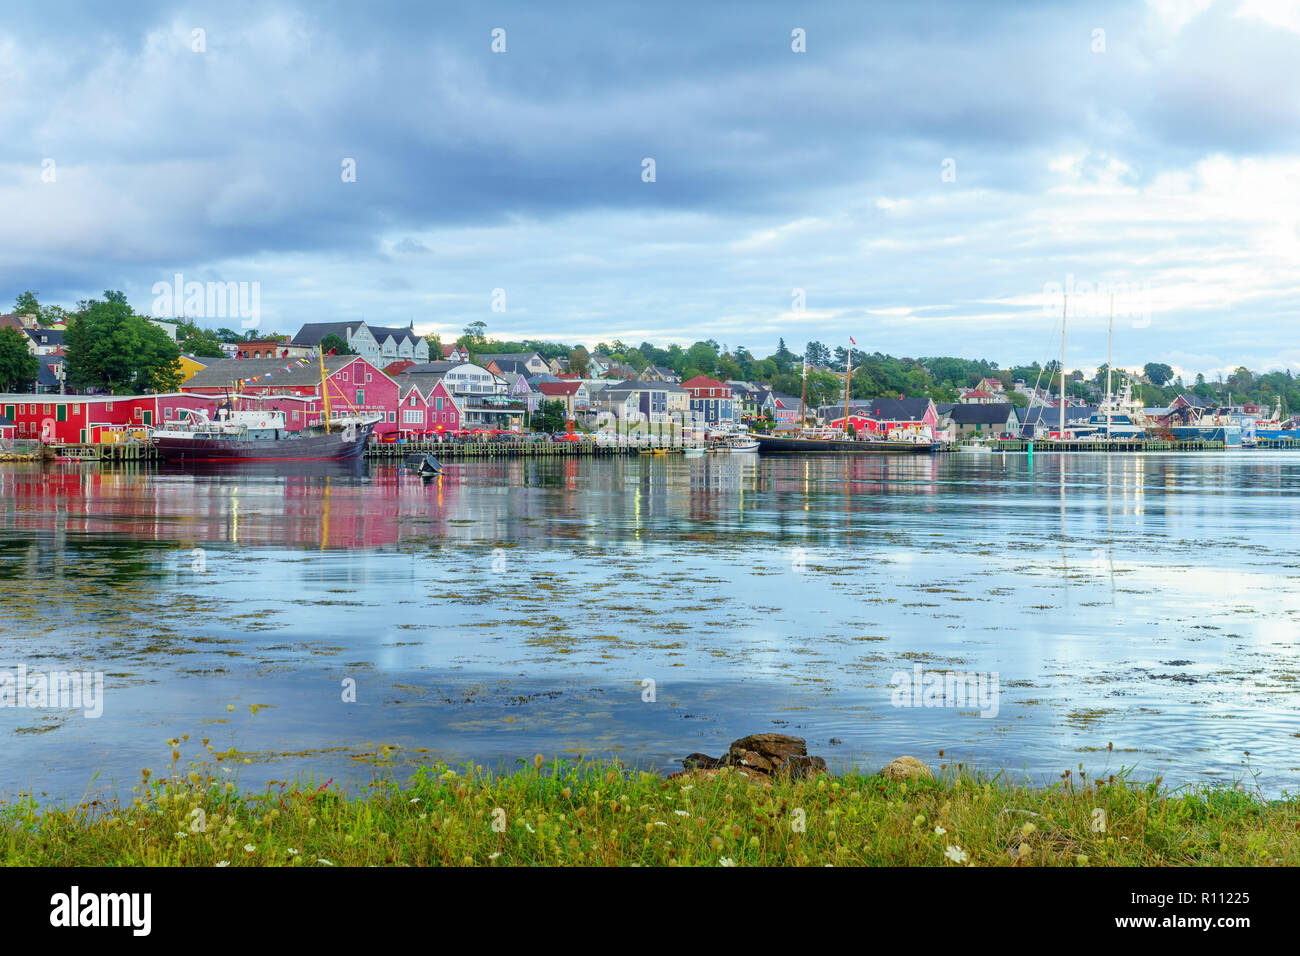 Lunenburg, Canada - September 20, 2018: Sunset view of the waterfront and port of the historic town Lunenburg, Nova Scotia, Canada Stock Photo